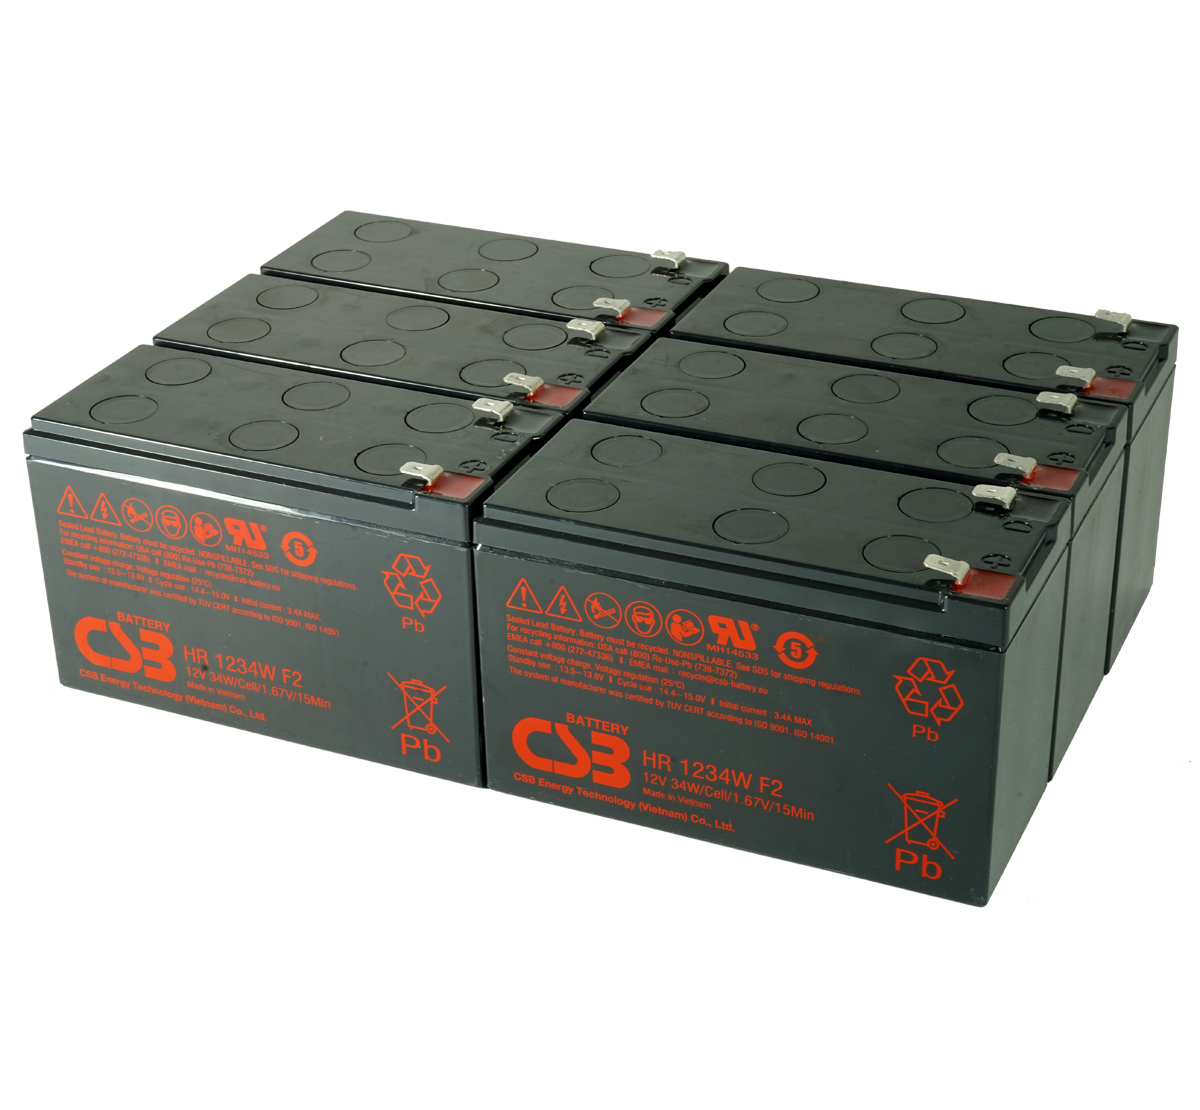 MDS2806 UPS Battery Kit for MGE AB2806